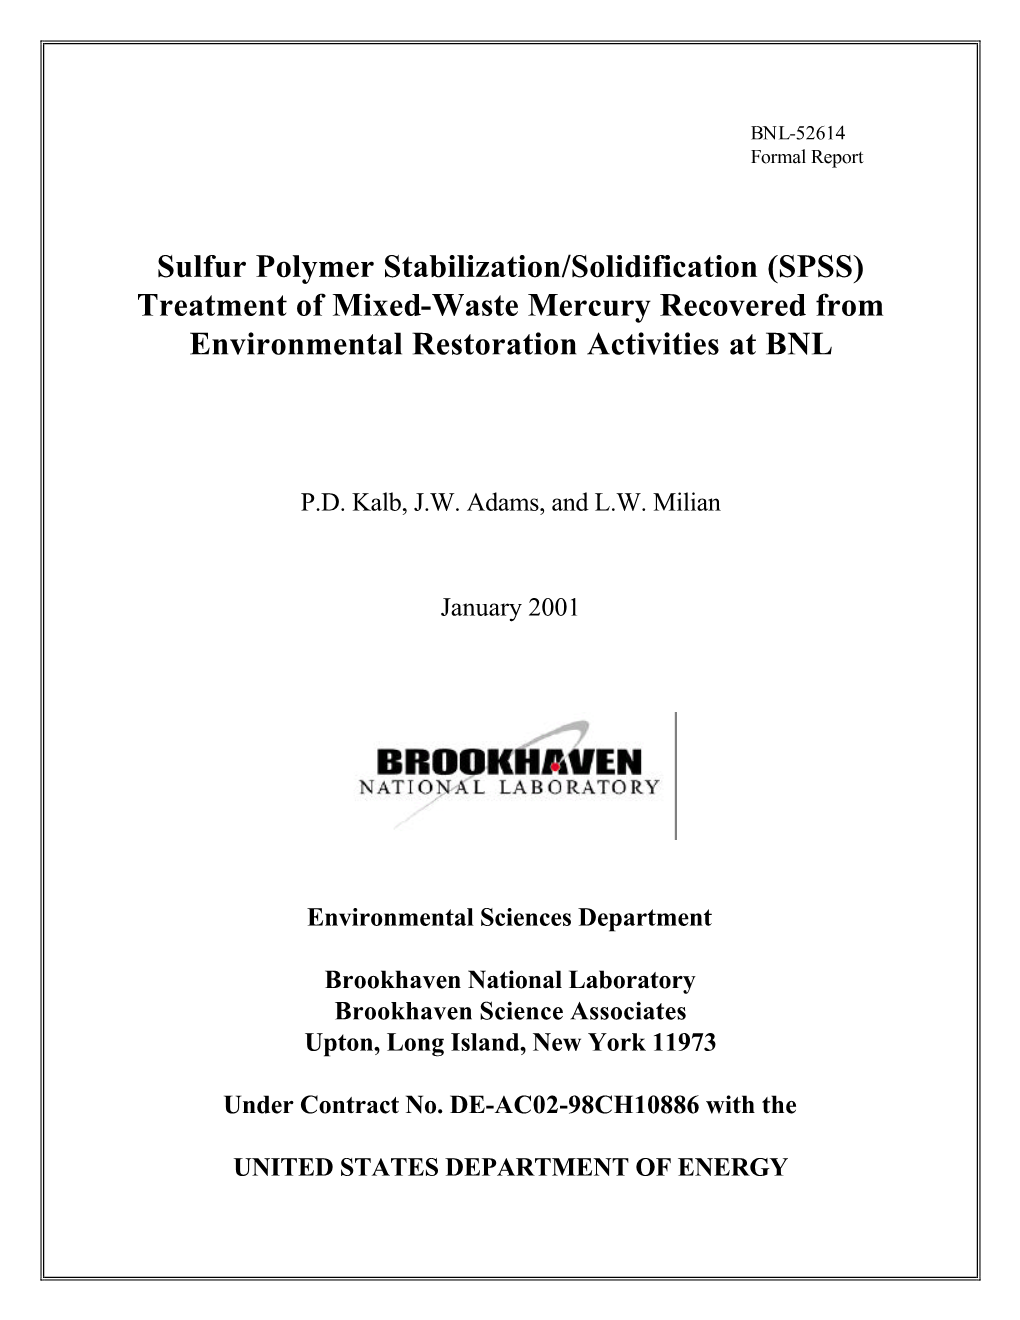 Sulfur Polymer Stabilization/Solidification (SPSS) Treatment of Mixed-Waste Mercury Recovered from Environmental Restoration Activities at BNL